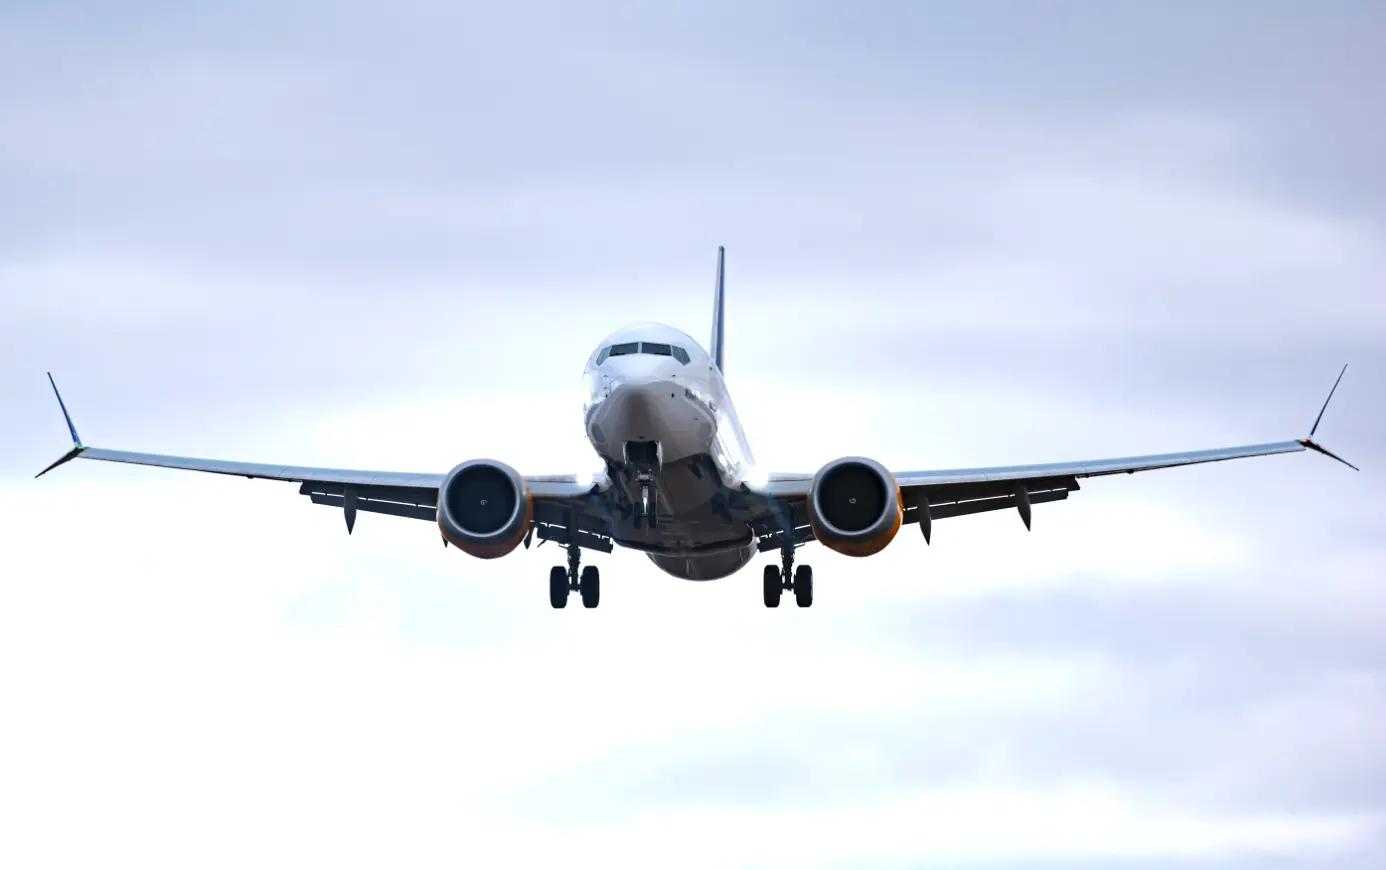 The jet engine noise is loudest during takeoffs and landings.